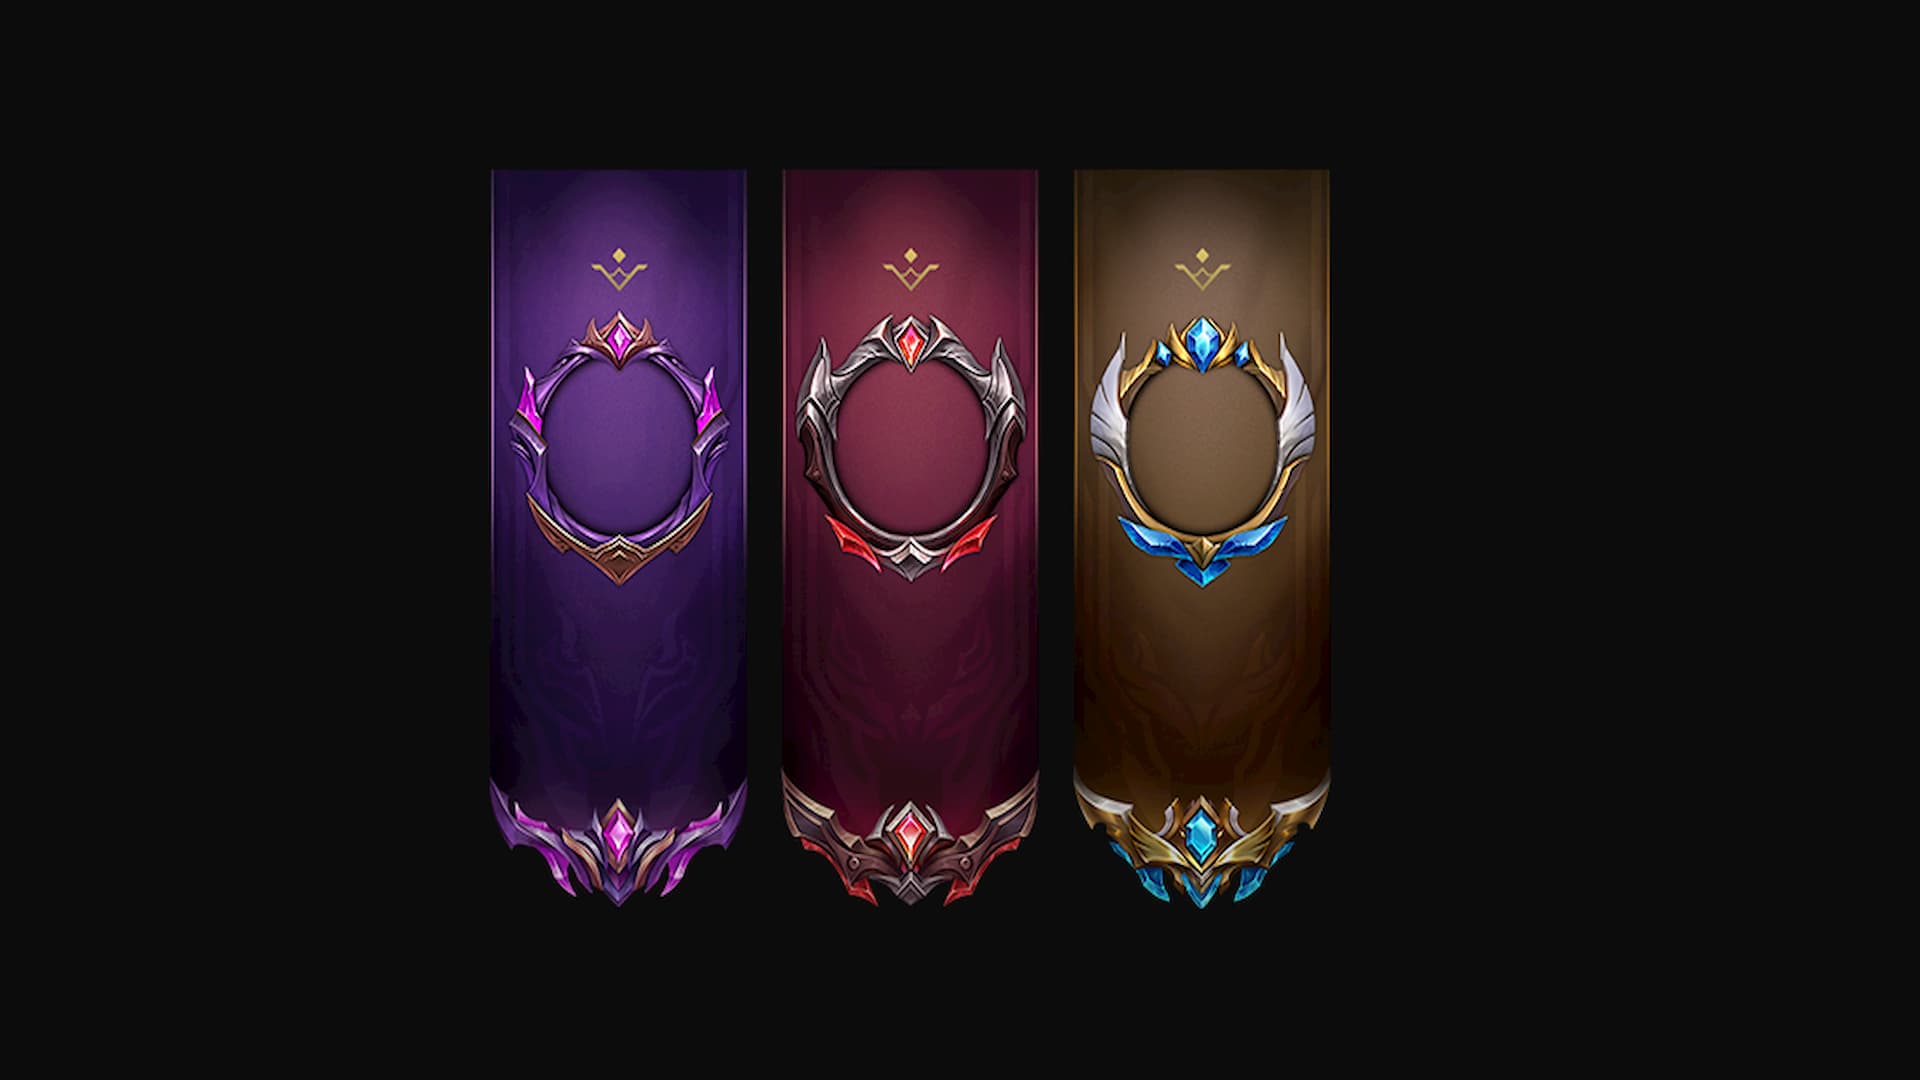 New Iron and Grandmaster ranks are coming to League - The Rift Herald